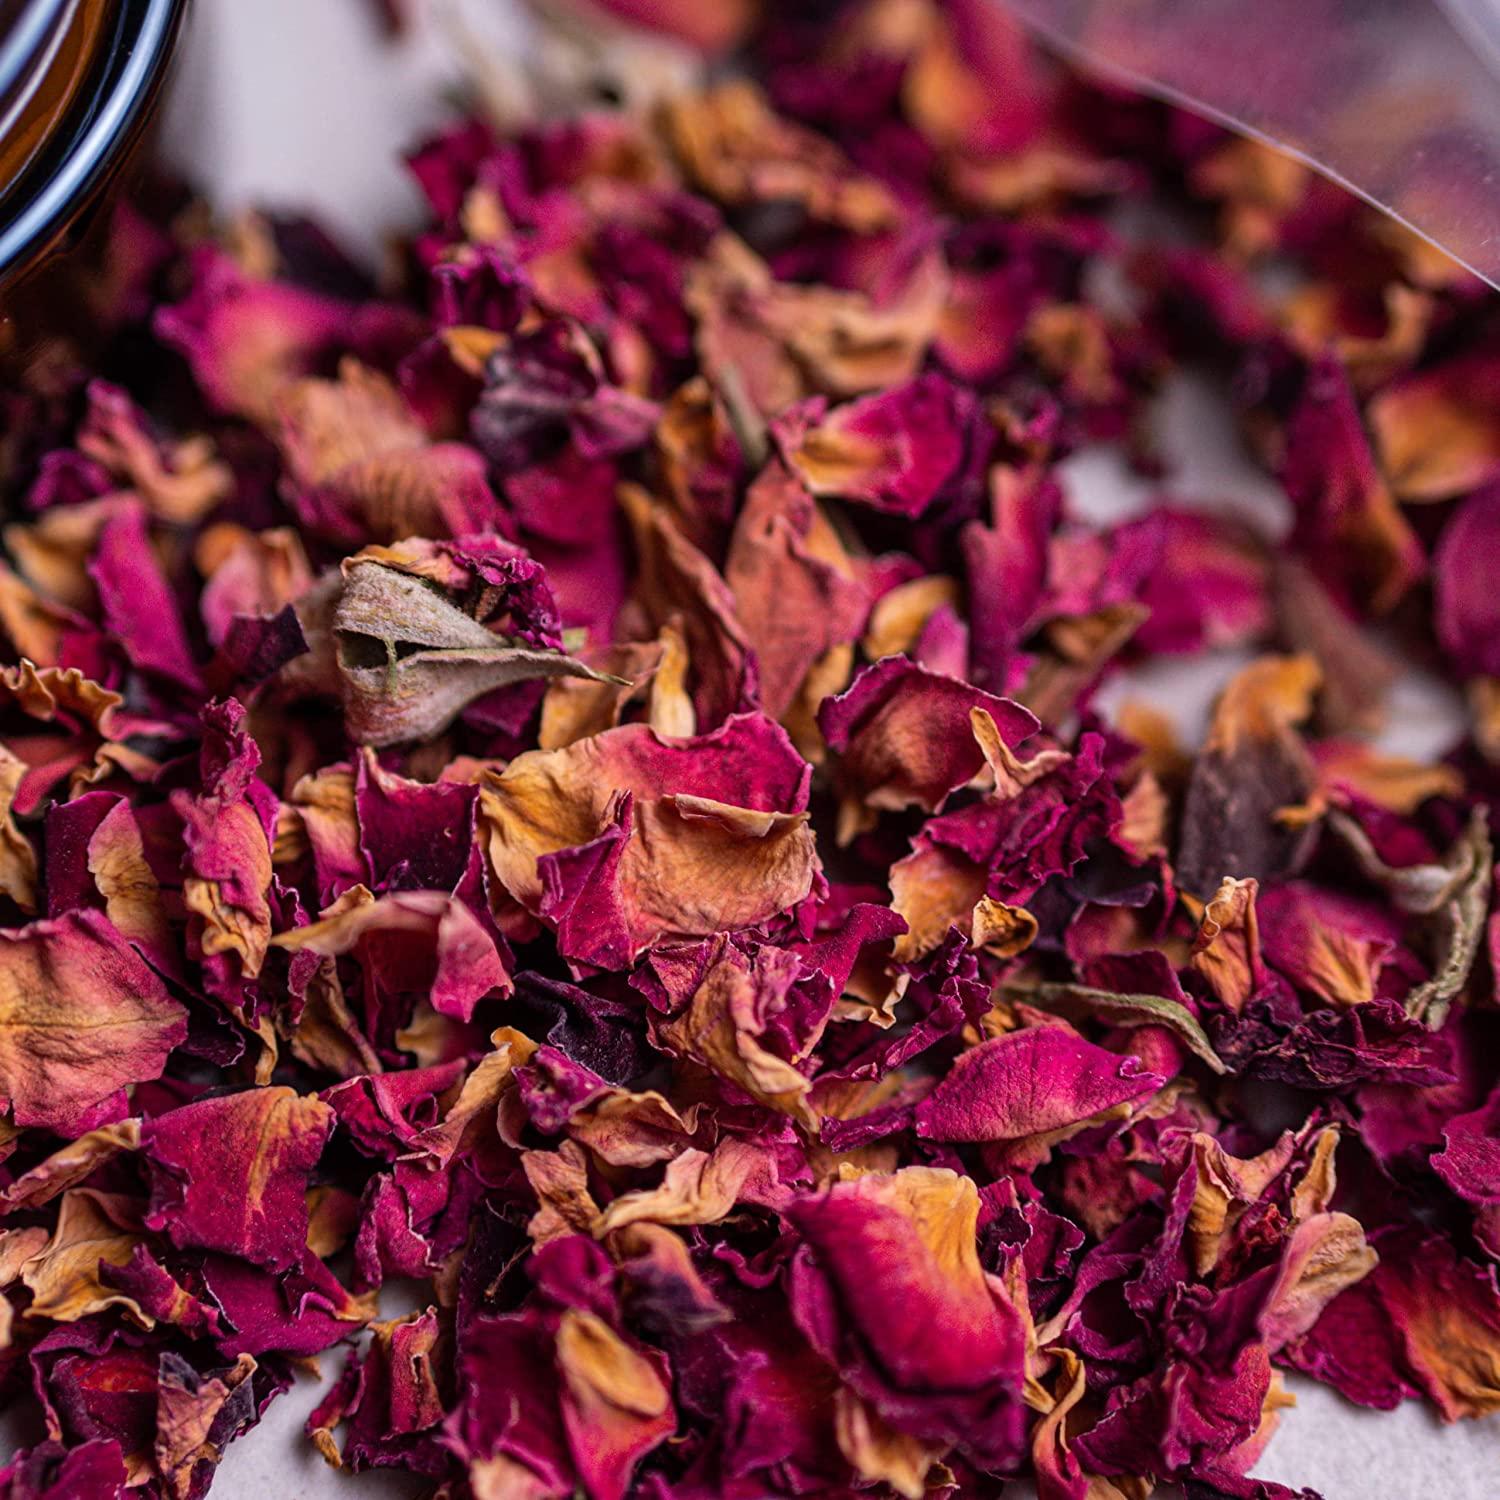 Dry Rose Petals, Red and Fragrant for Tea, Baking, Crafts, Sachets, Baths, ARO